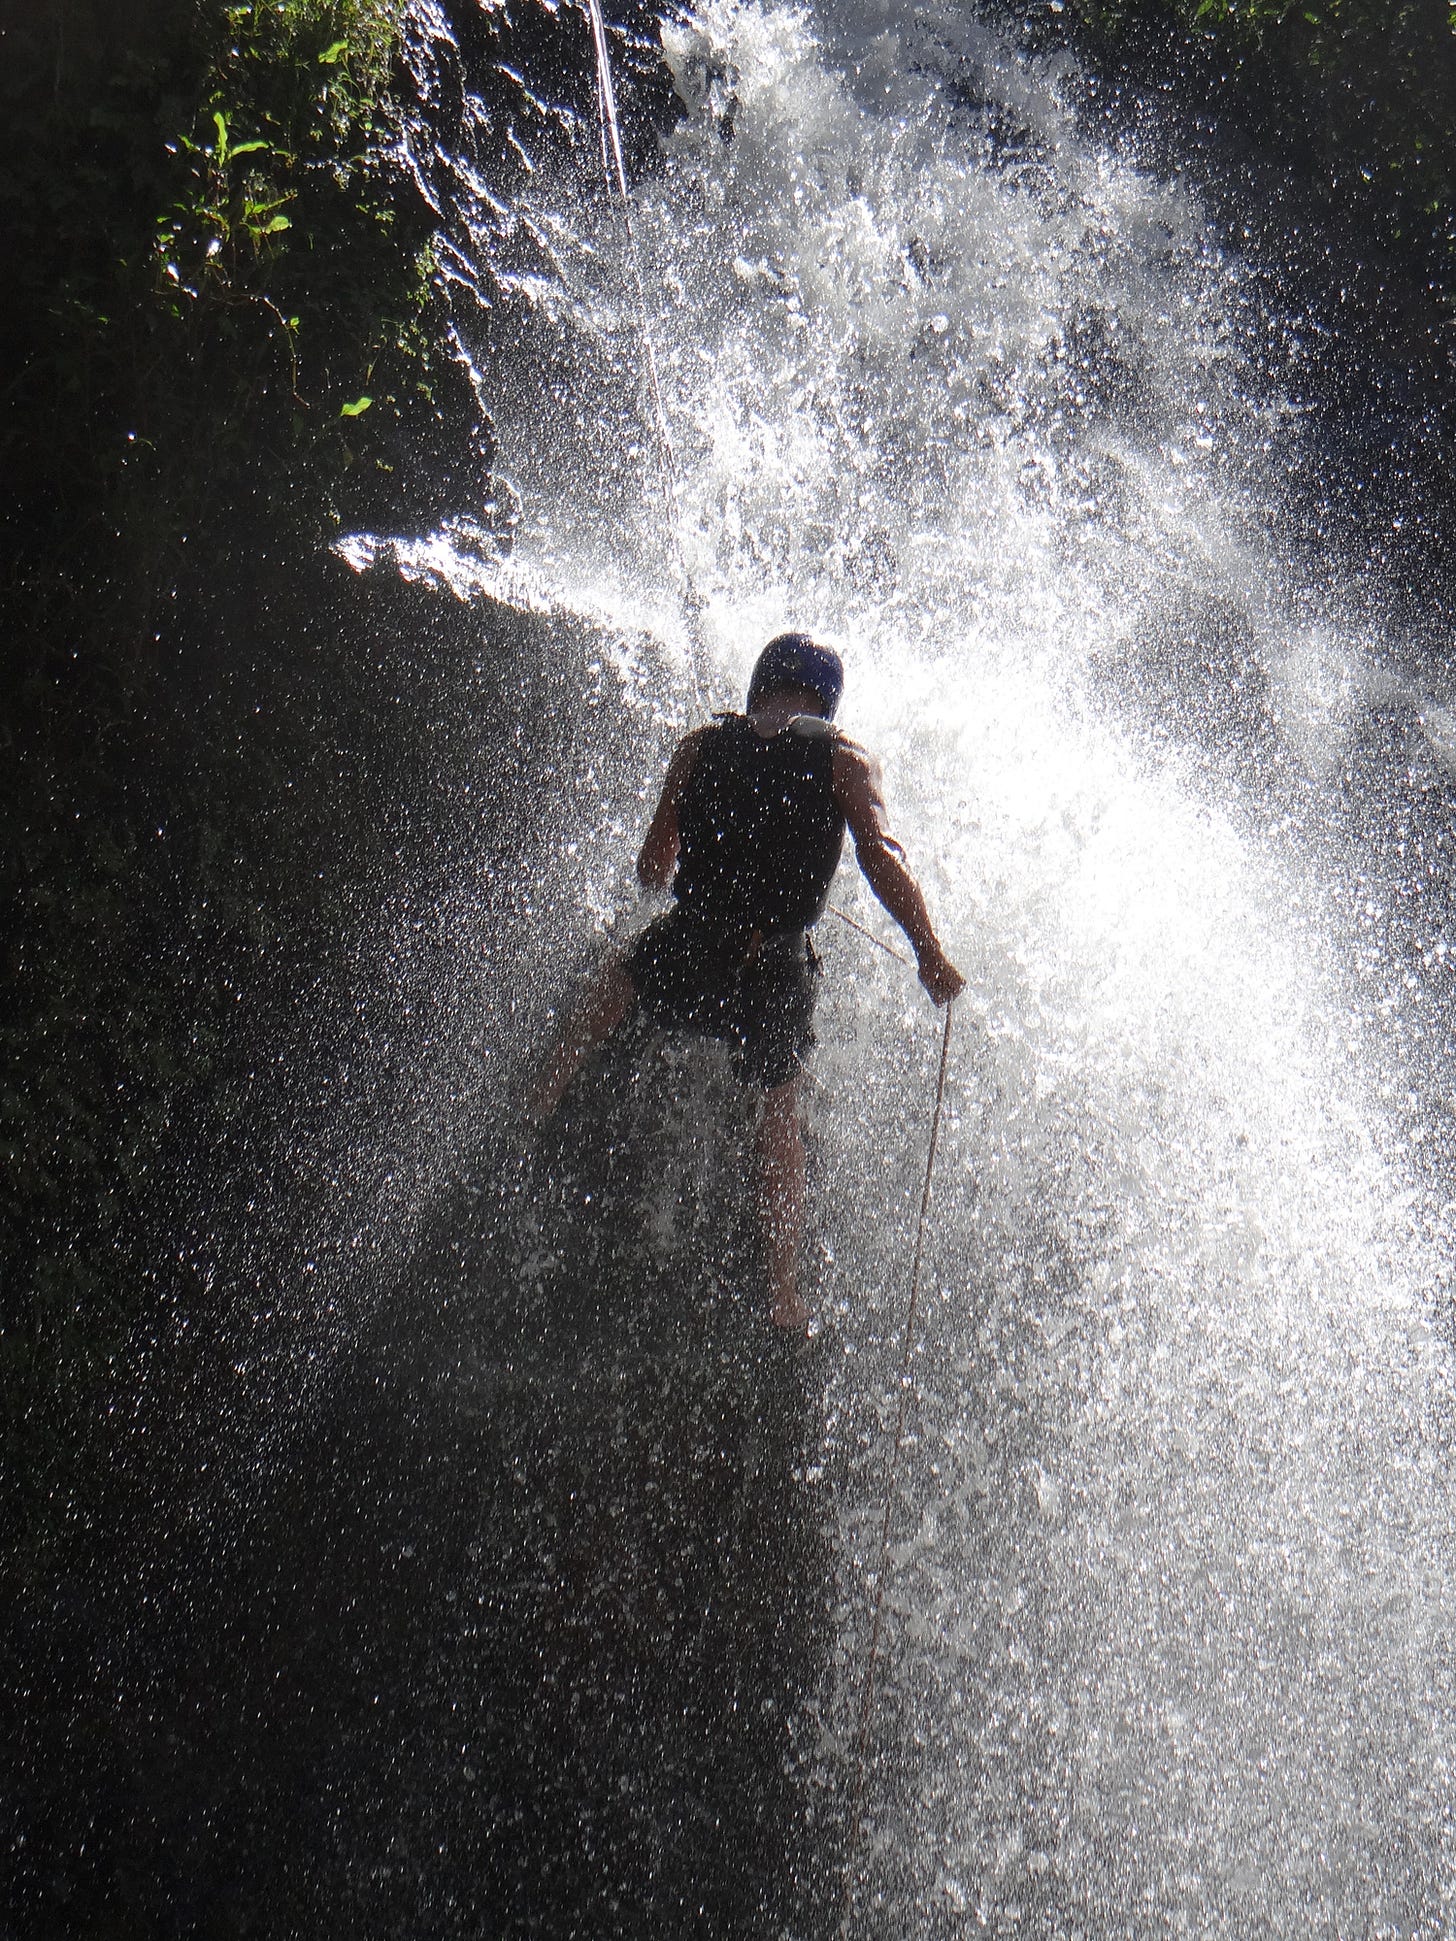 Abseiling down the waterfall